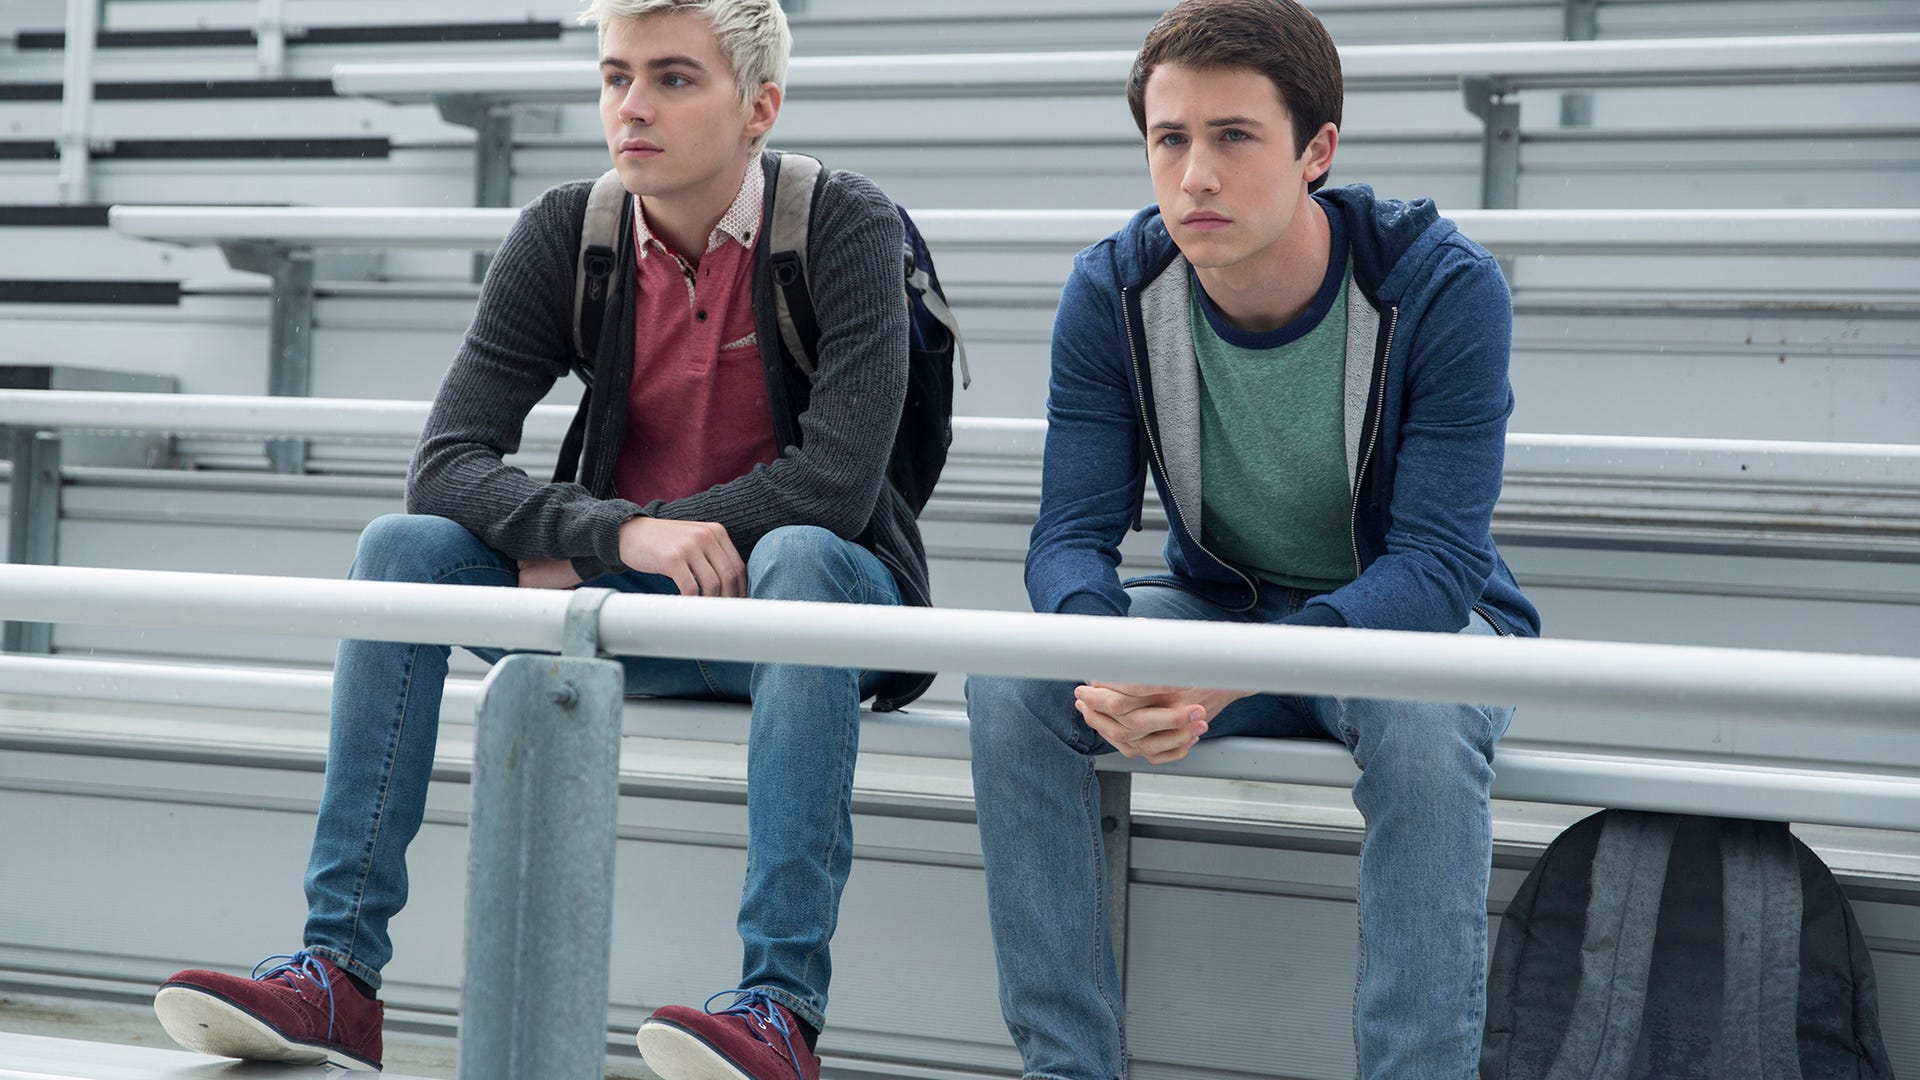 Miles Heizer, Dylan Minnette, 13 Reasons Why